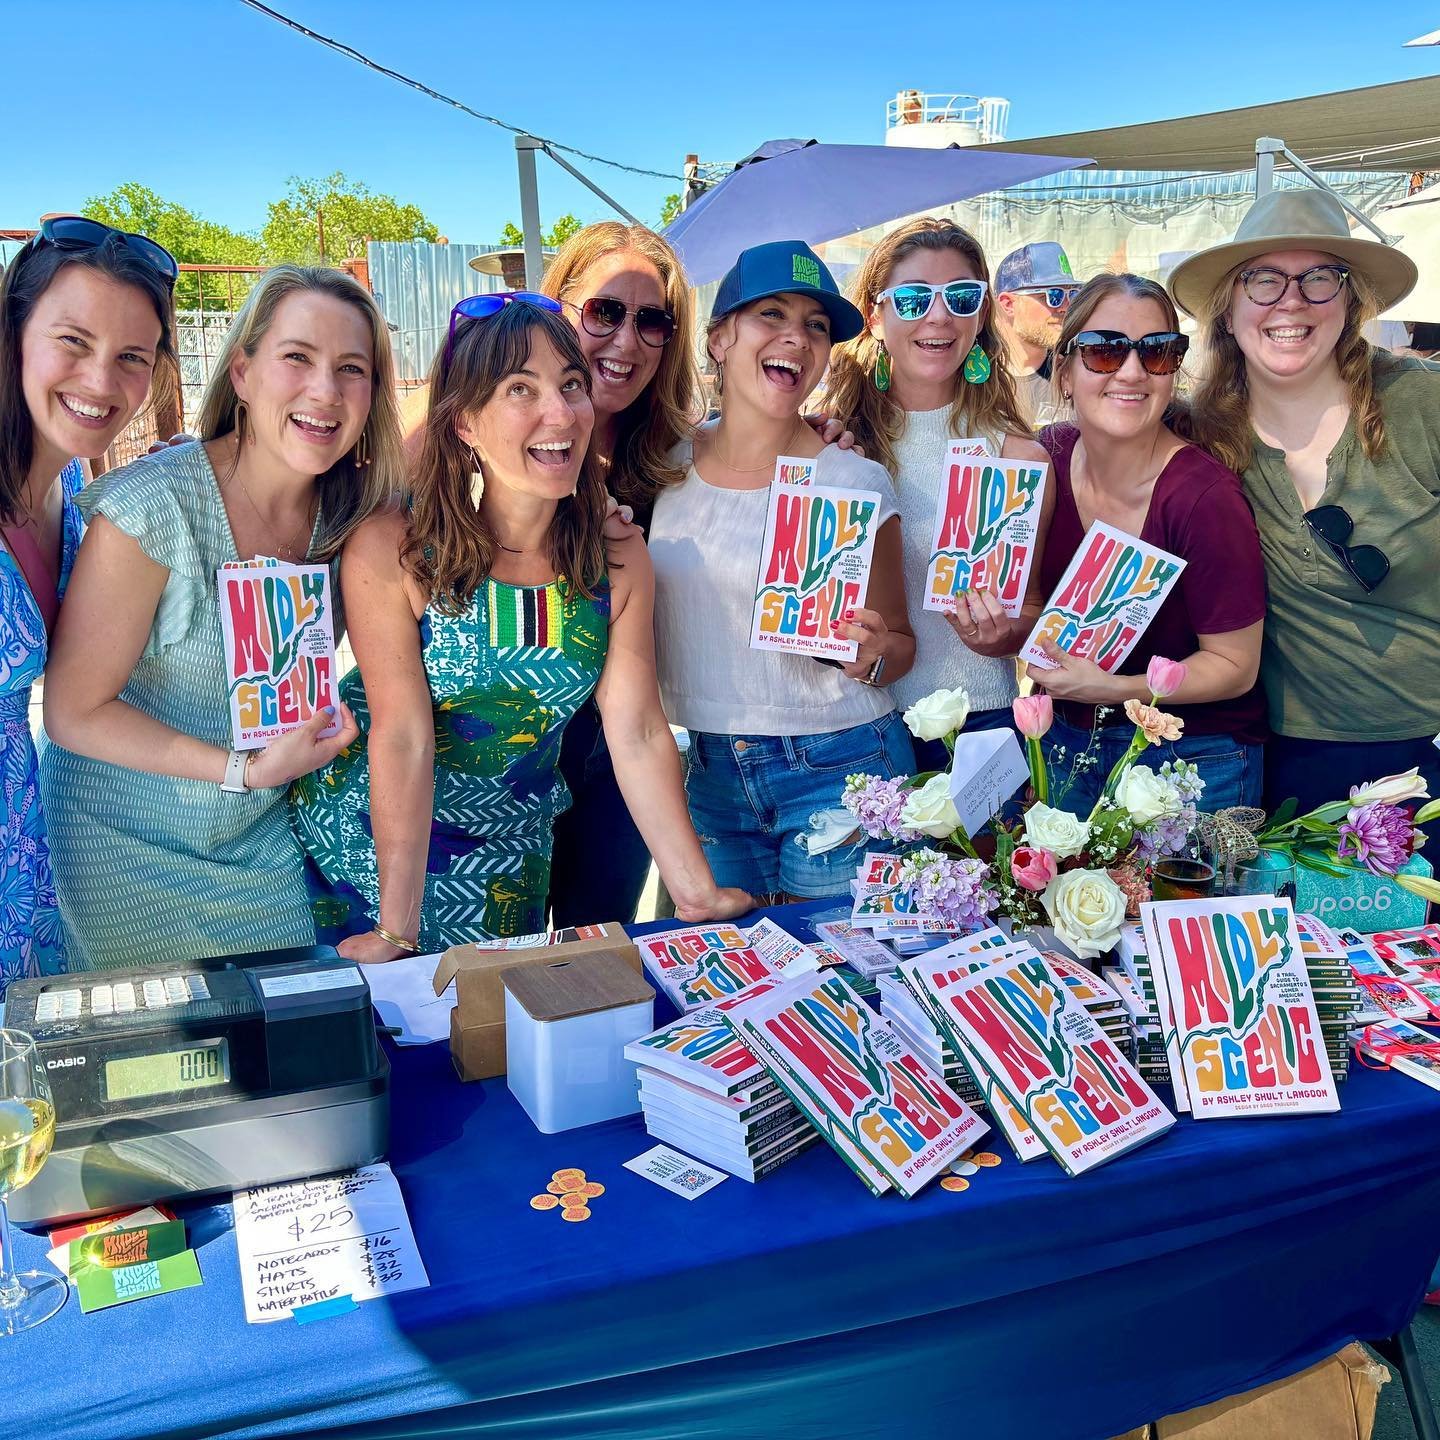 Could you tell I had an absolute blast yesterday at my Mildly Scenic Launch Party?

For three hours I signed books and connected with an entire community of folks who came down from the foothills, up from the Bay Area, and from within the diverse and